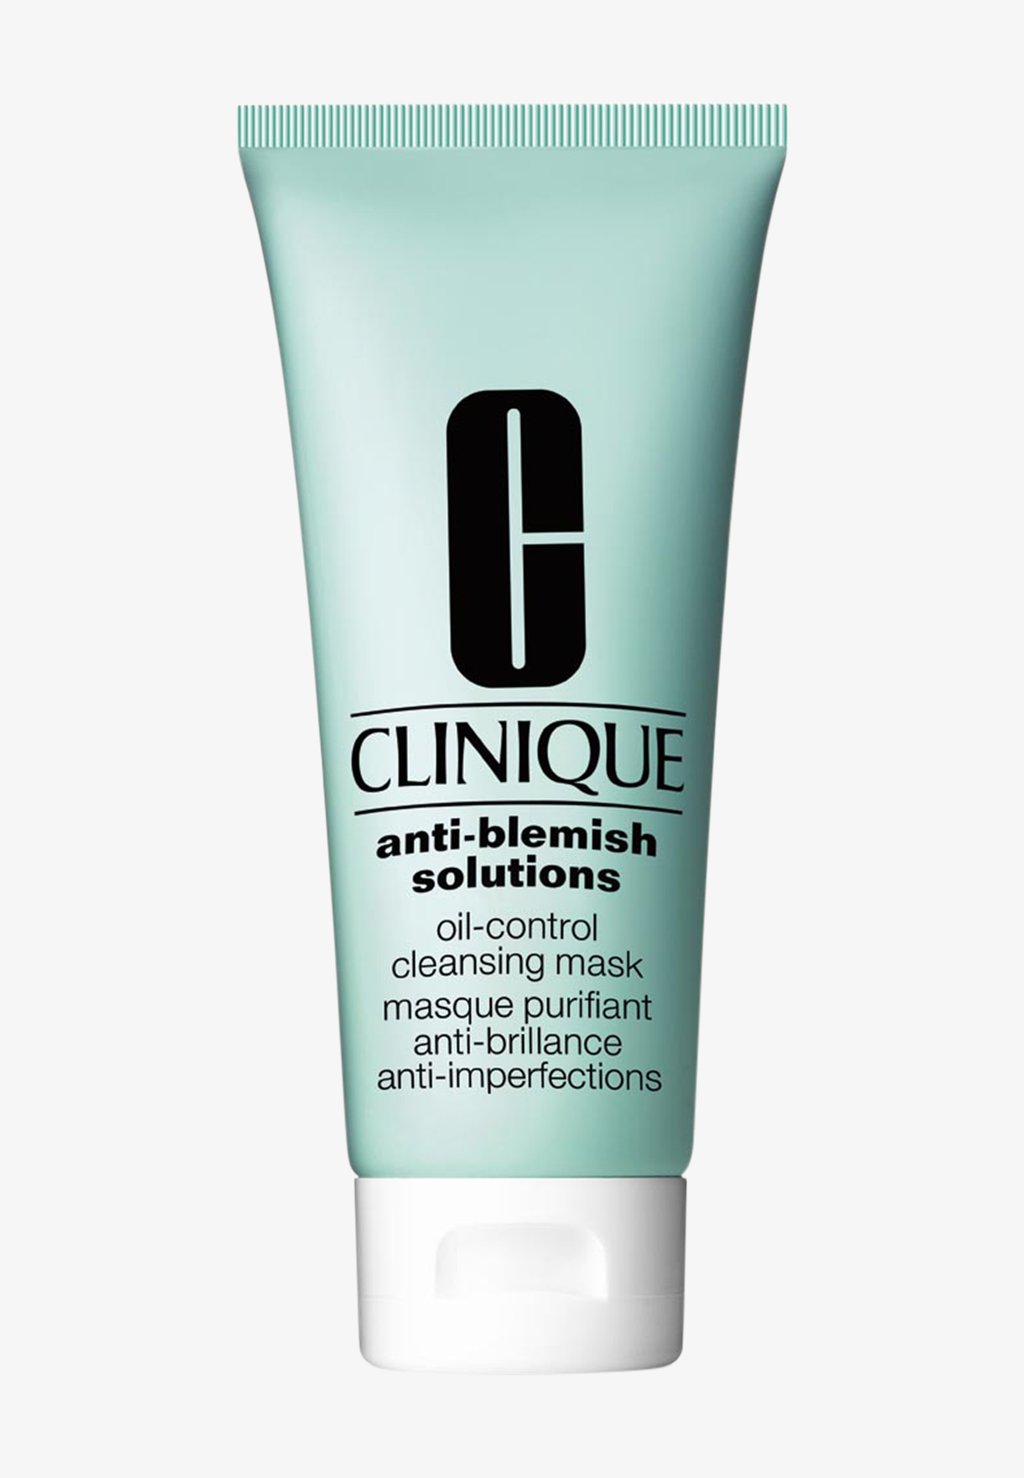 Маска для лица Anti-Blemish Solutions Oil-Control Mask Clinique маска для лица clinique anti blemish solutions oil control cleansing mask